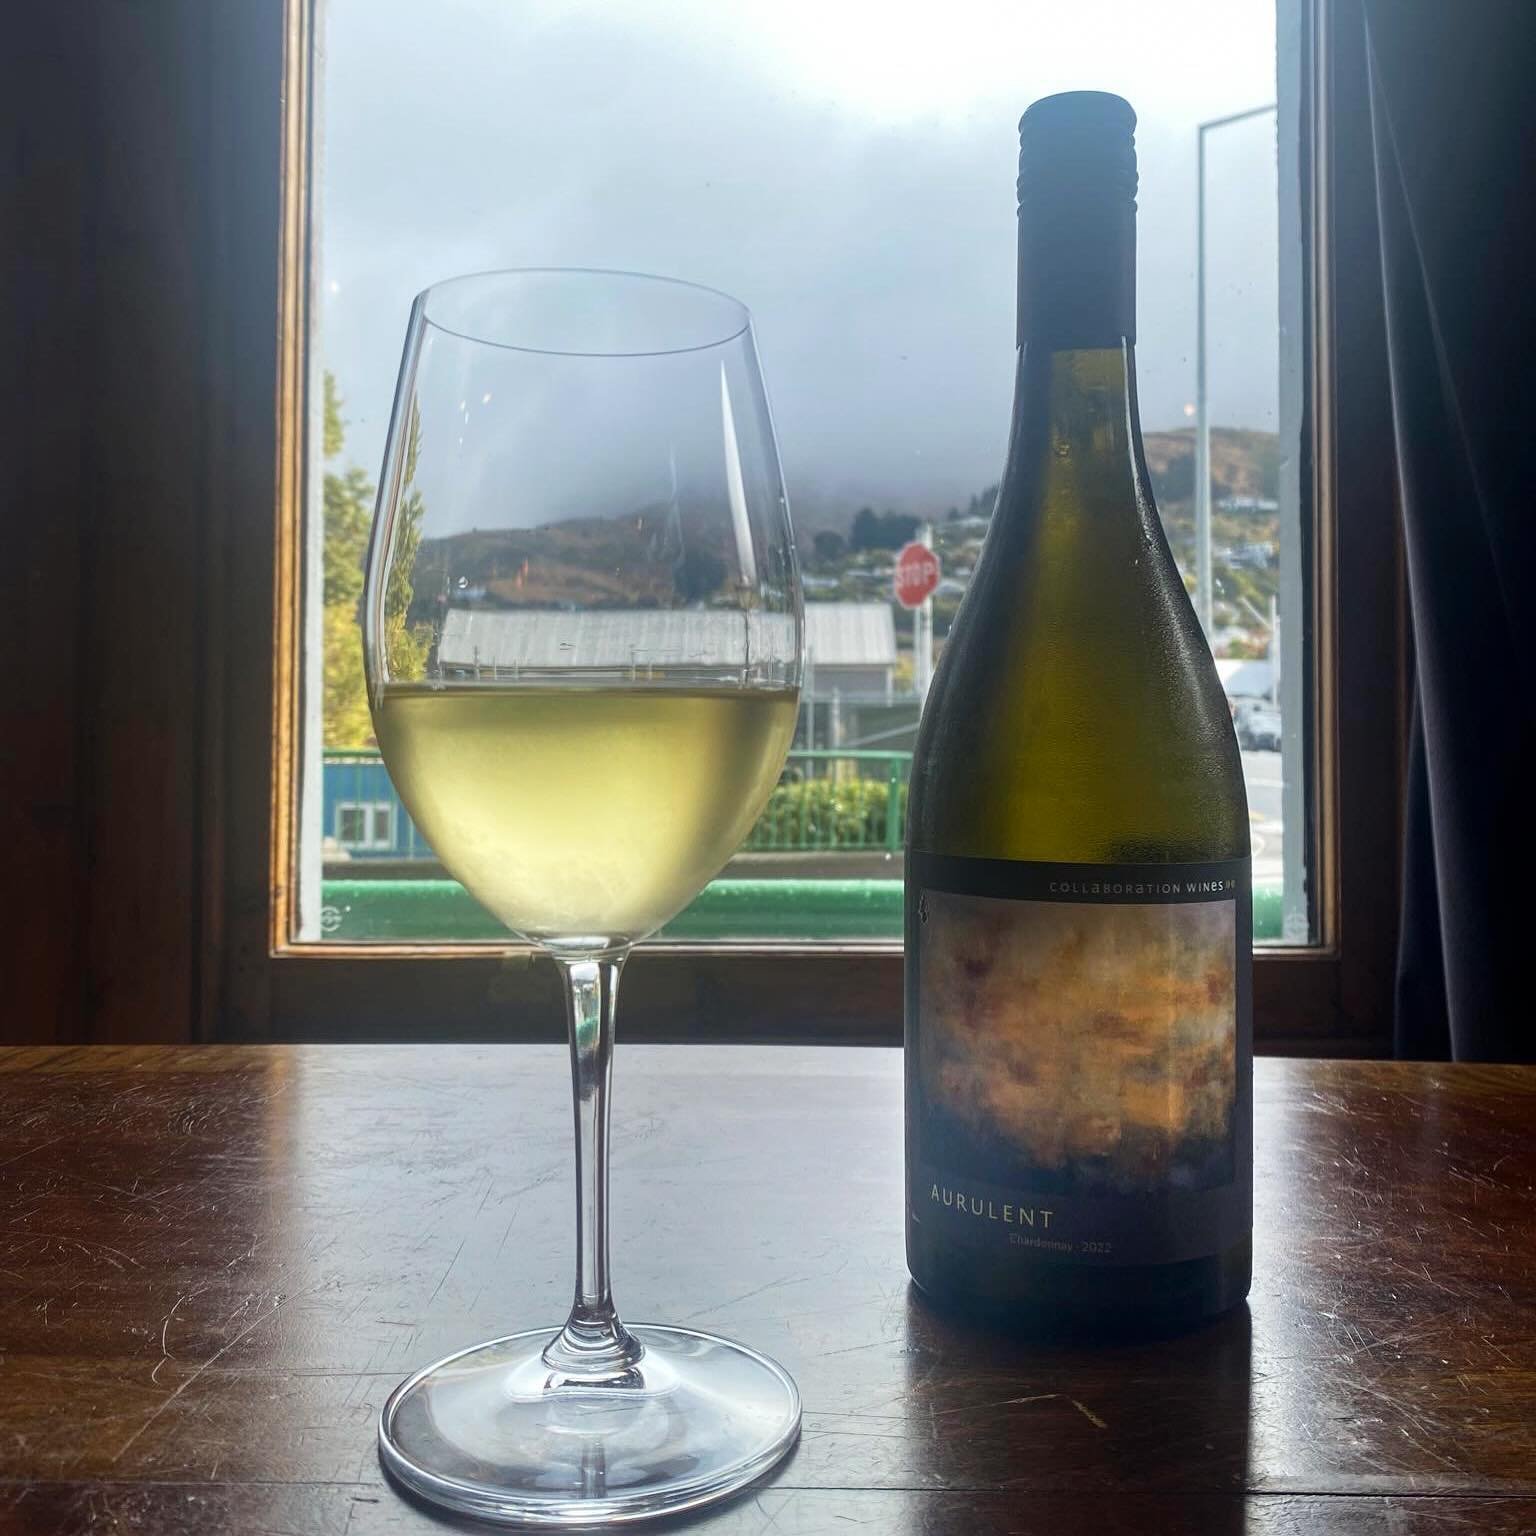 Aurulent Chardonnay, Hawkes Bay 2021

A deeply complex, slowly unfolding, rich &amp; barrel aged Chardonnay. Entering with a soft and creamy palette finishing with dry, peach and lemon flavours.

A balanced &amp; complex wine that everyone loves